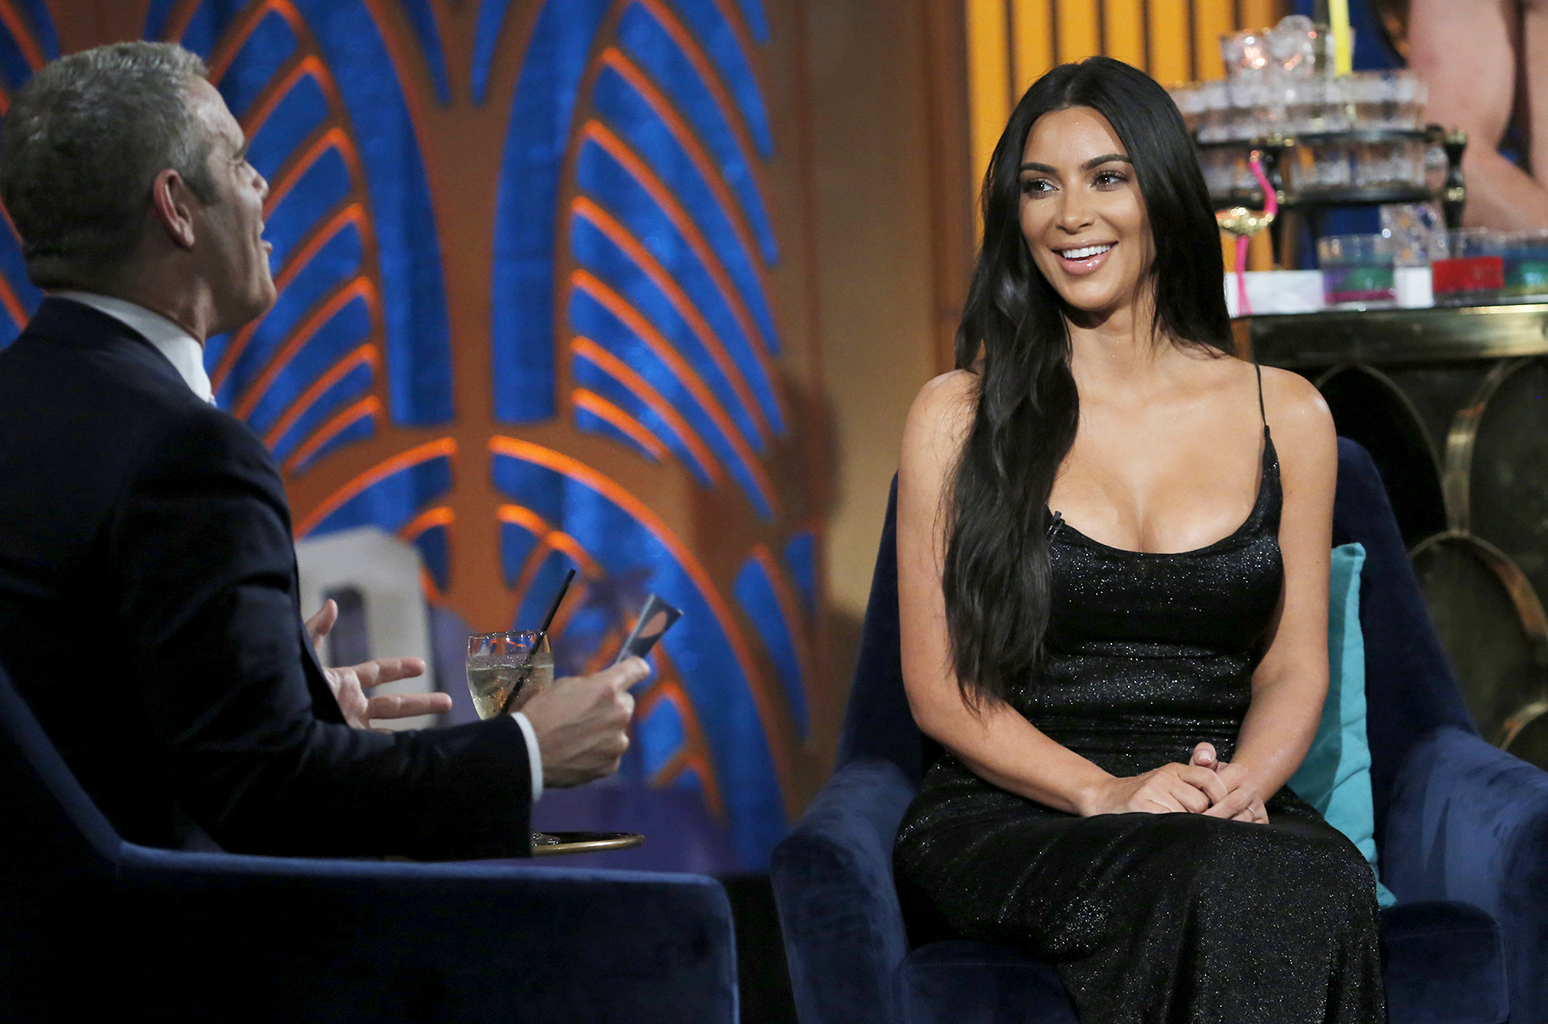 WATCH WHAT HAPPENS LIVE WITH ANDY COHEN -- Episode 14097 -- Pictured: (l-r) Andy Cohen, Kim Kardashian -- (Photo by: Chris Haston/Bravo/NBCU Photo Bank via Getty Images)